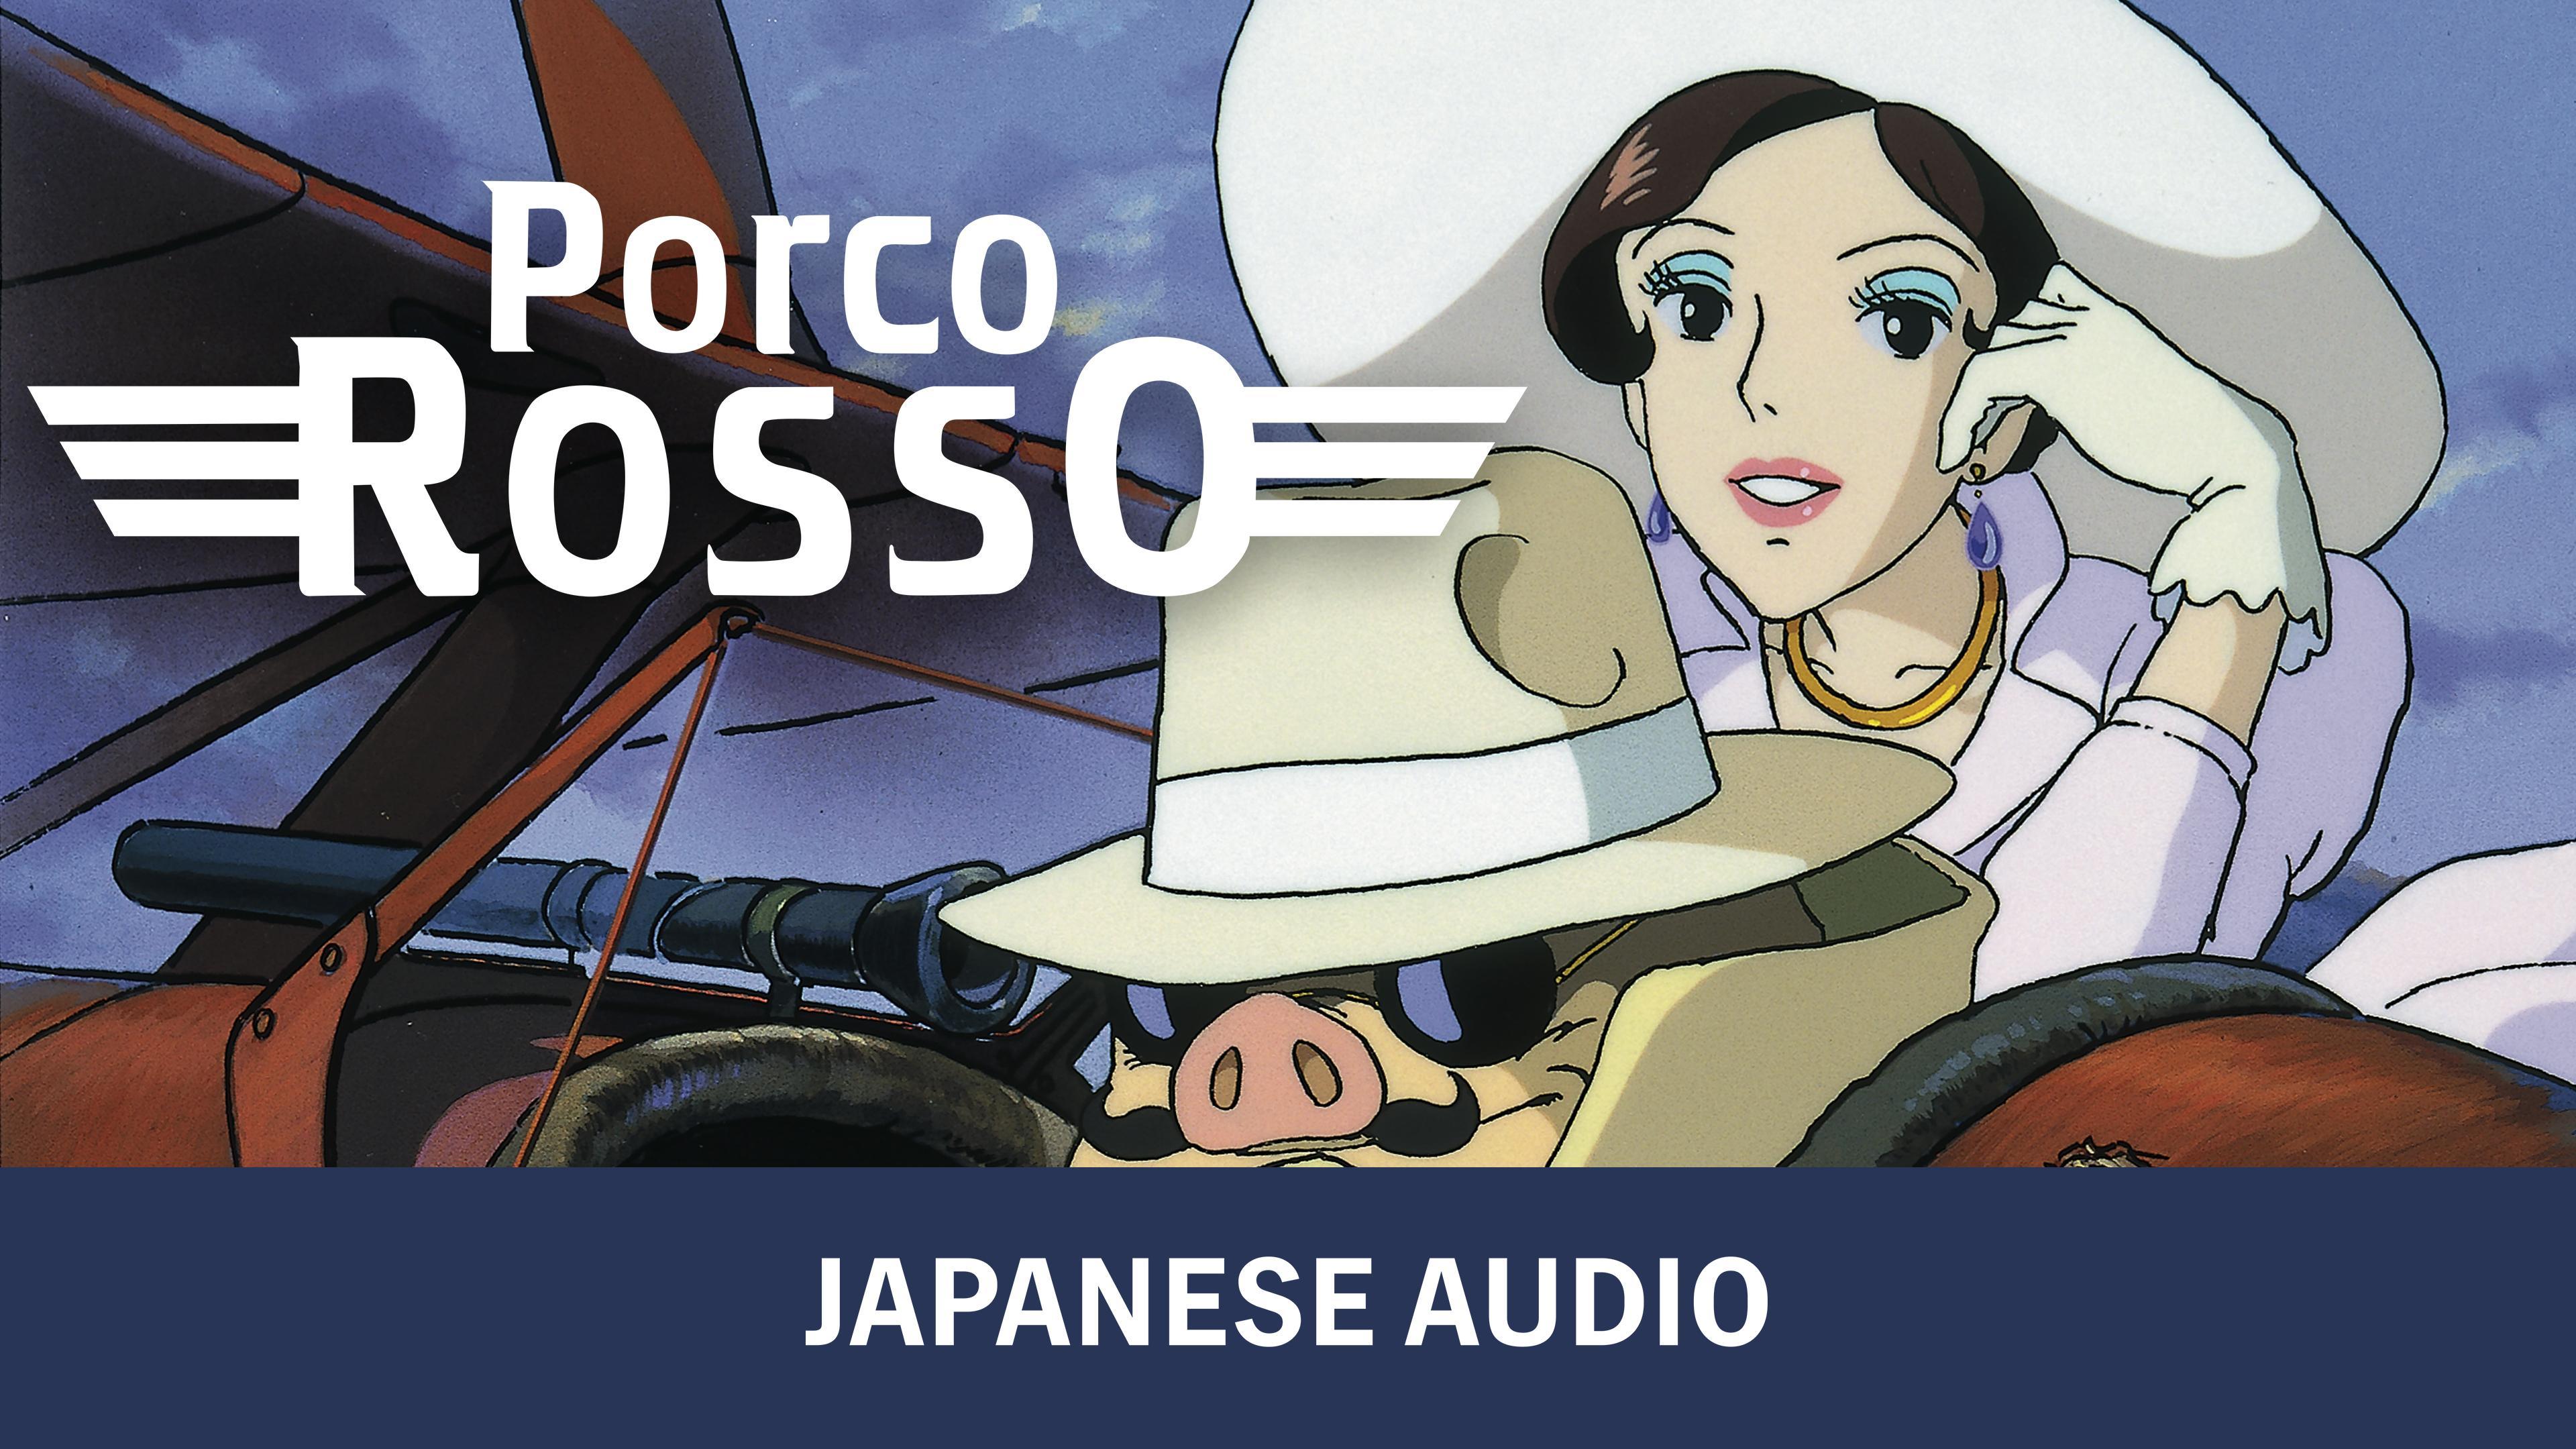 Watch Porco Rosso (Japanese Audio)